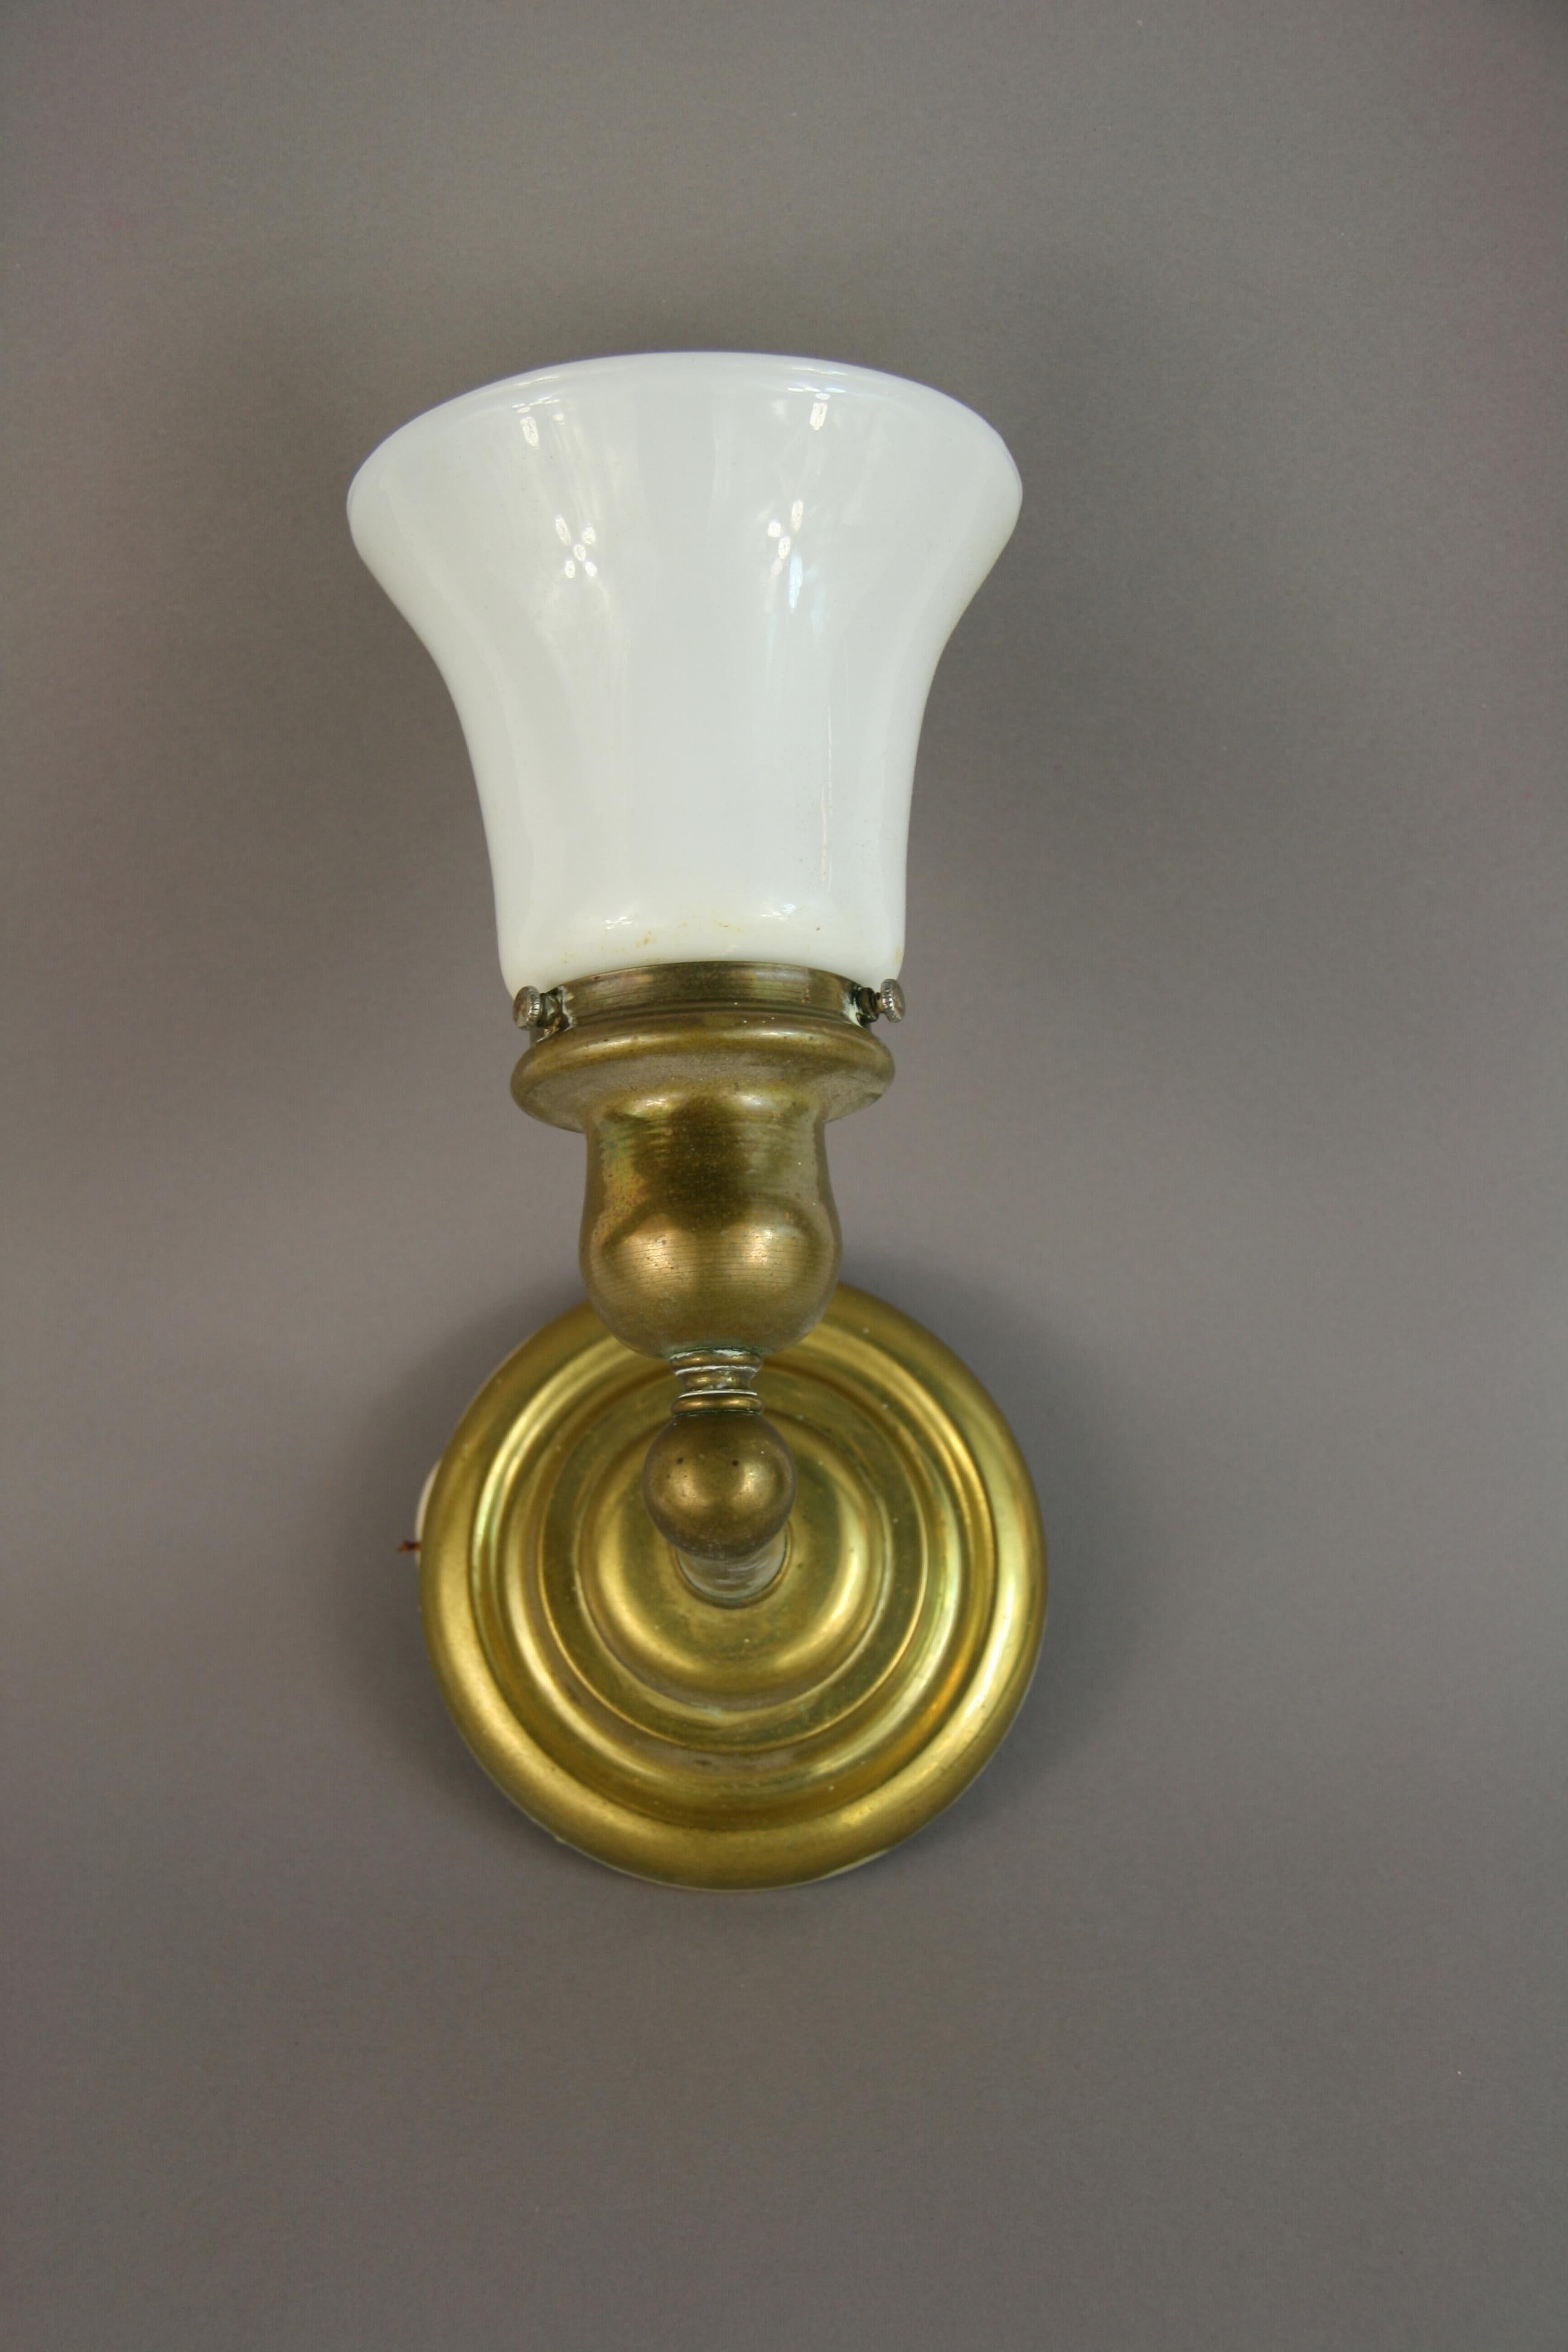 3-359 Pair of brass shades with white glass shades
Rewired
Takes one 60 watt bulb.